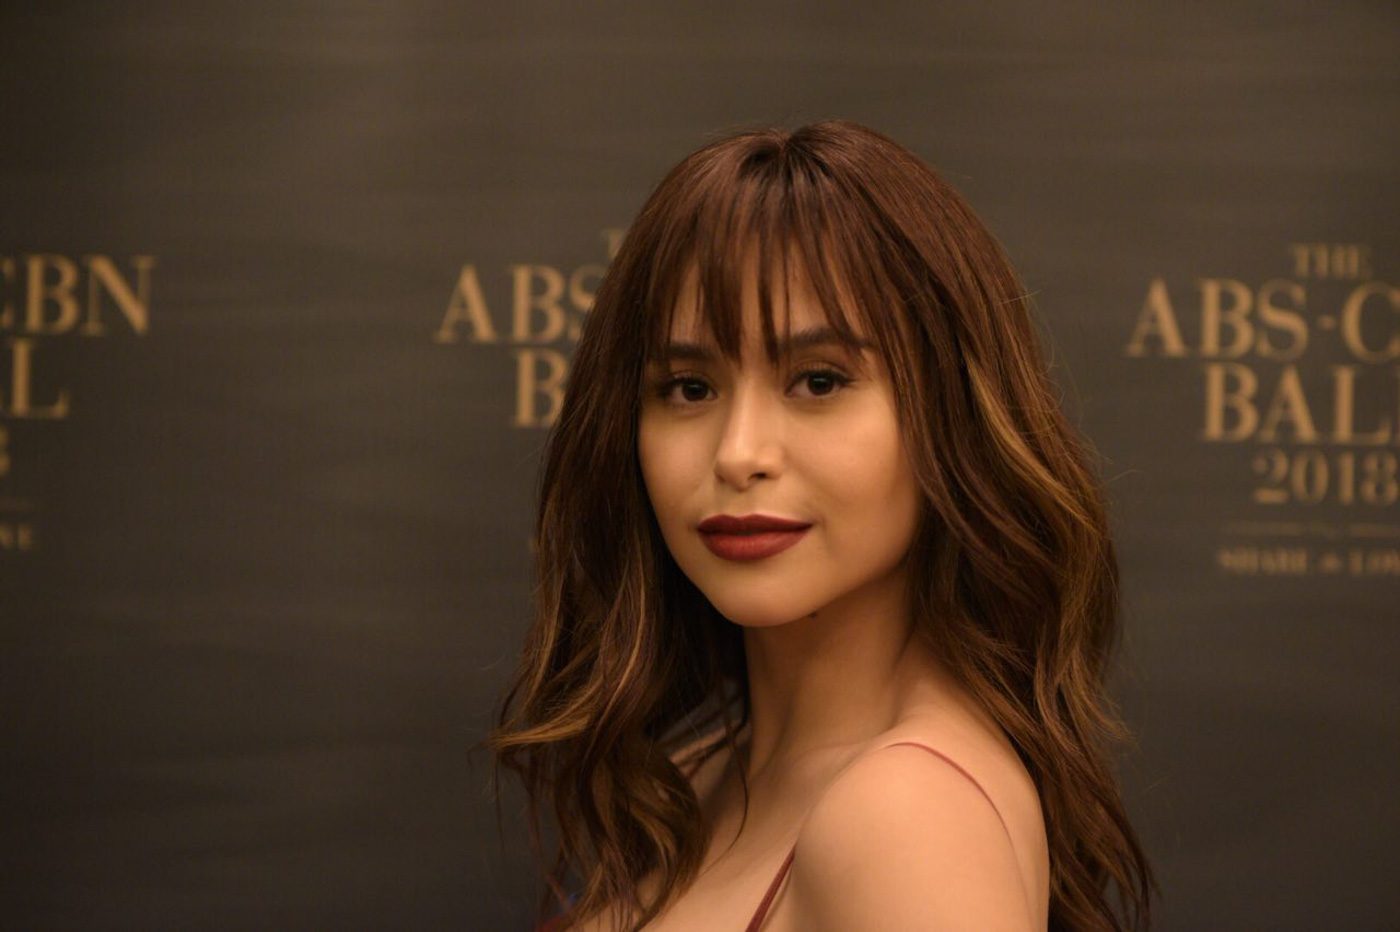 IN PHOTOS: The best makeup looks at the ABS-CBN Ball 2018